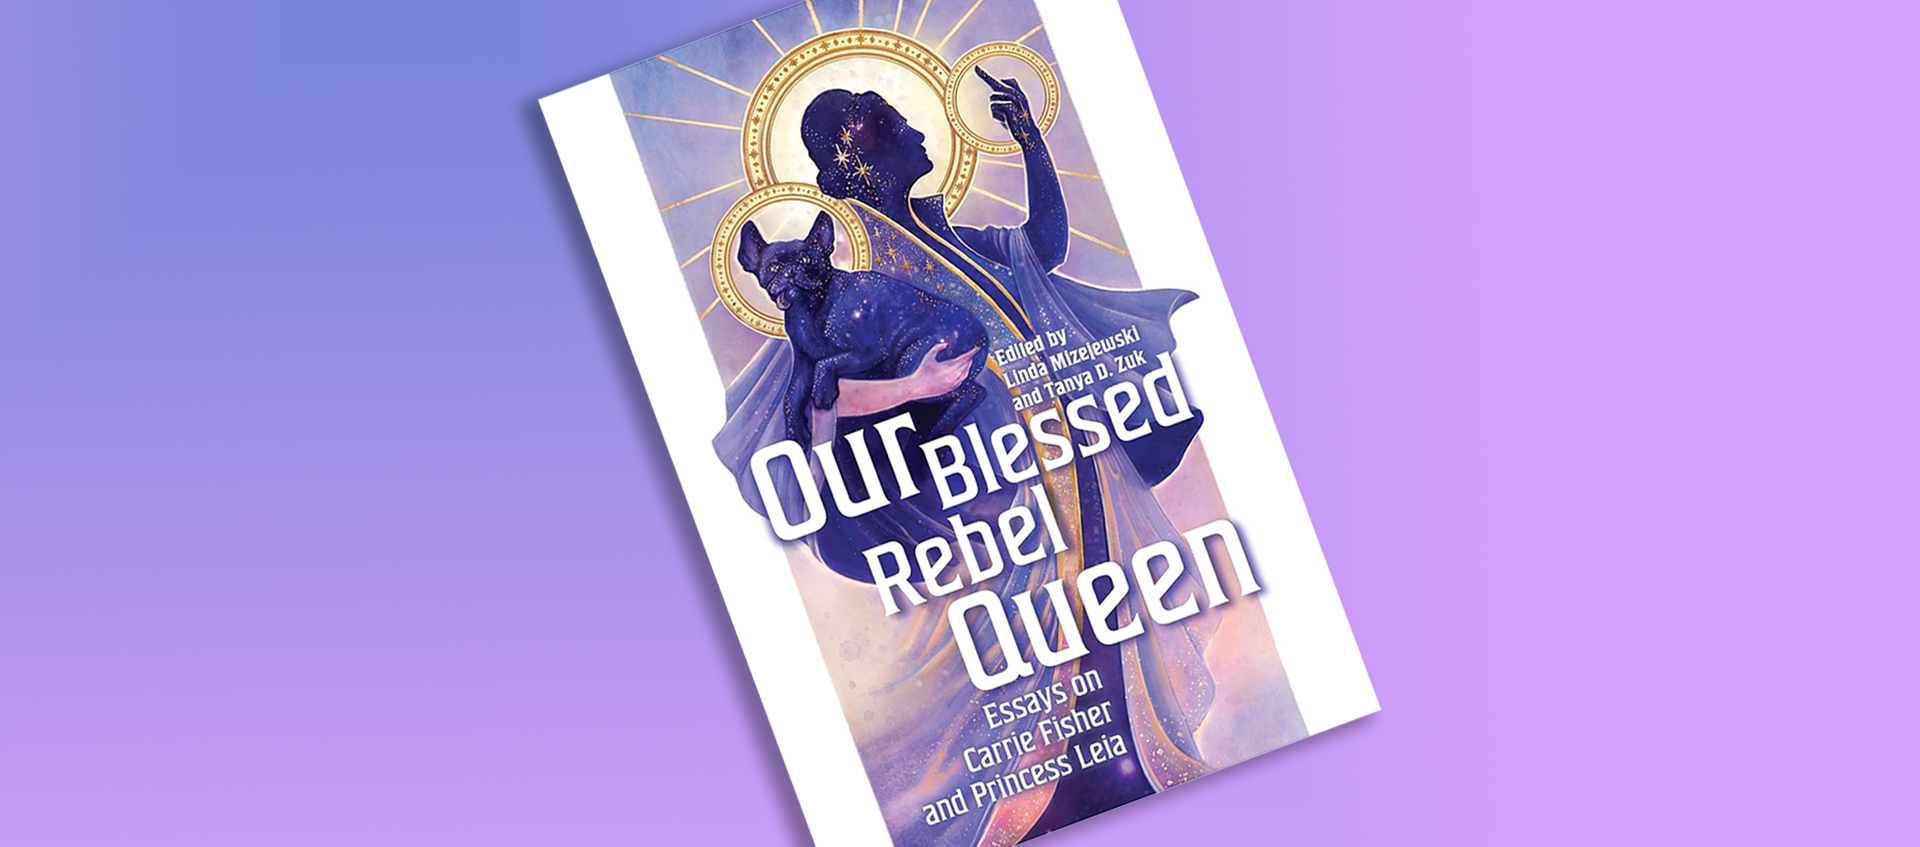 The book cover for Our Blessed Rebel Queen.